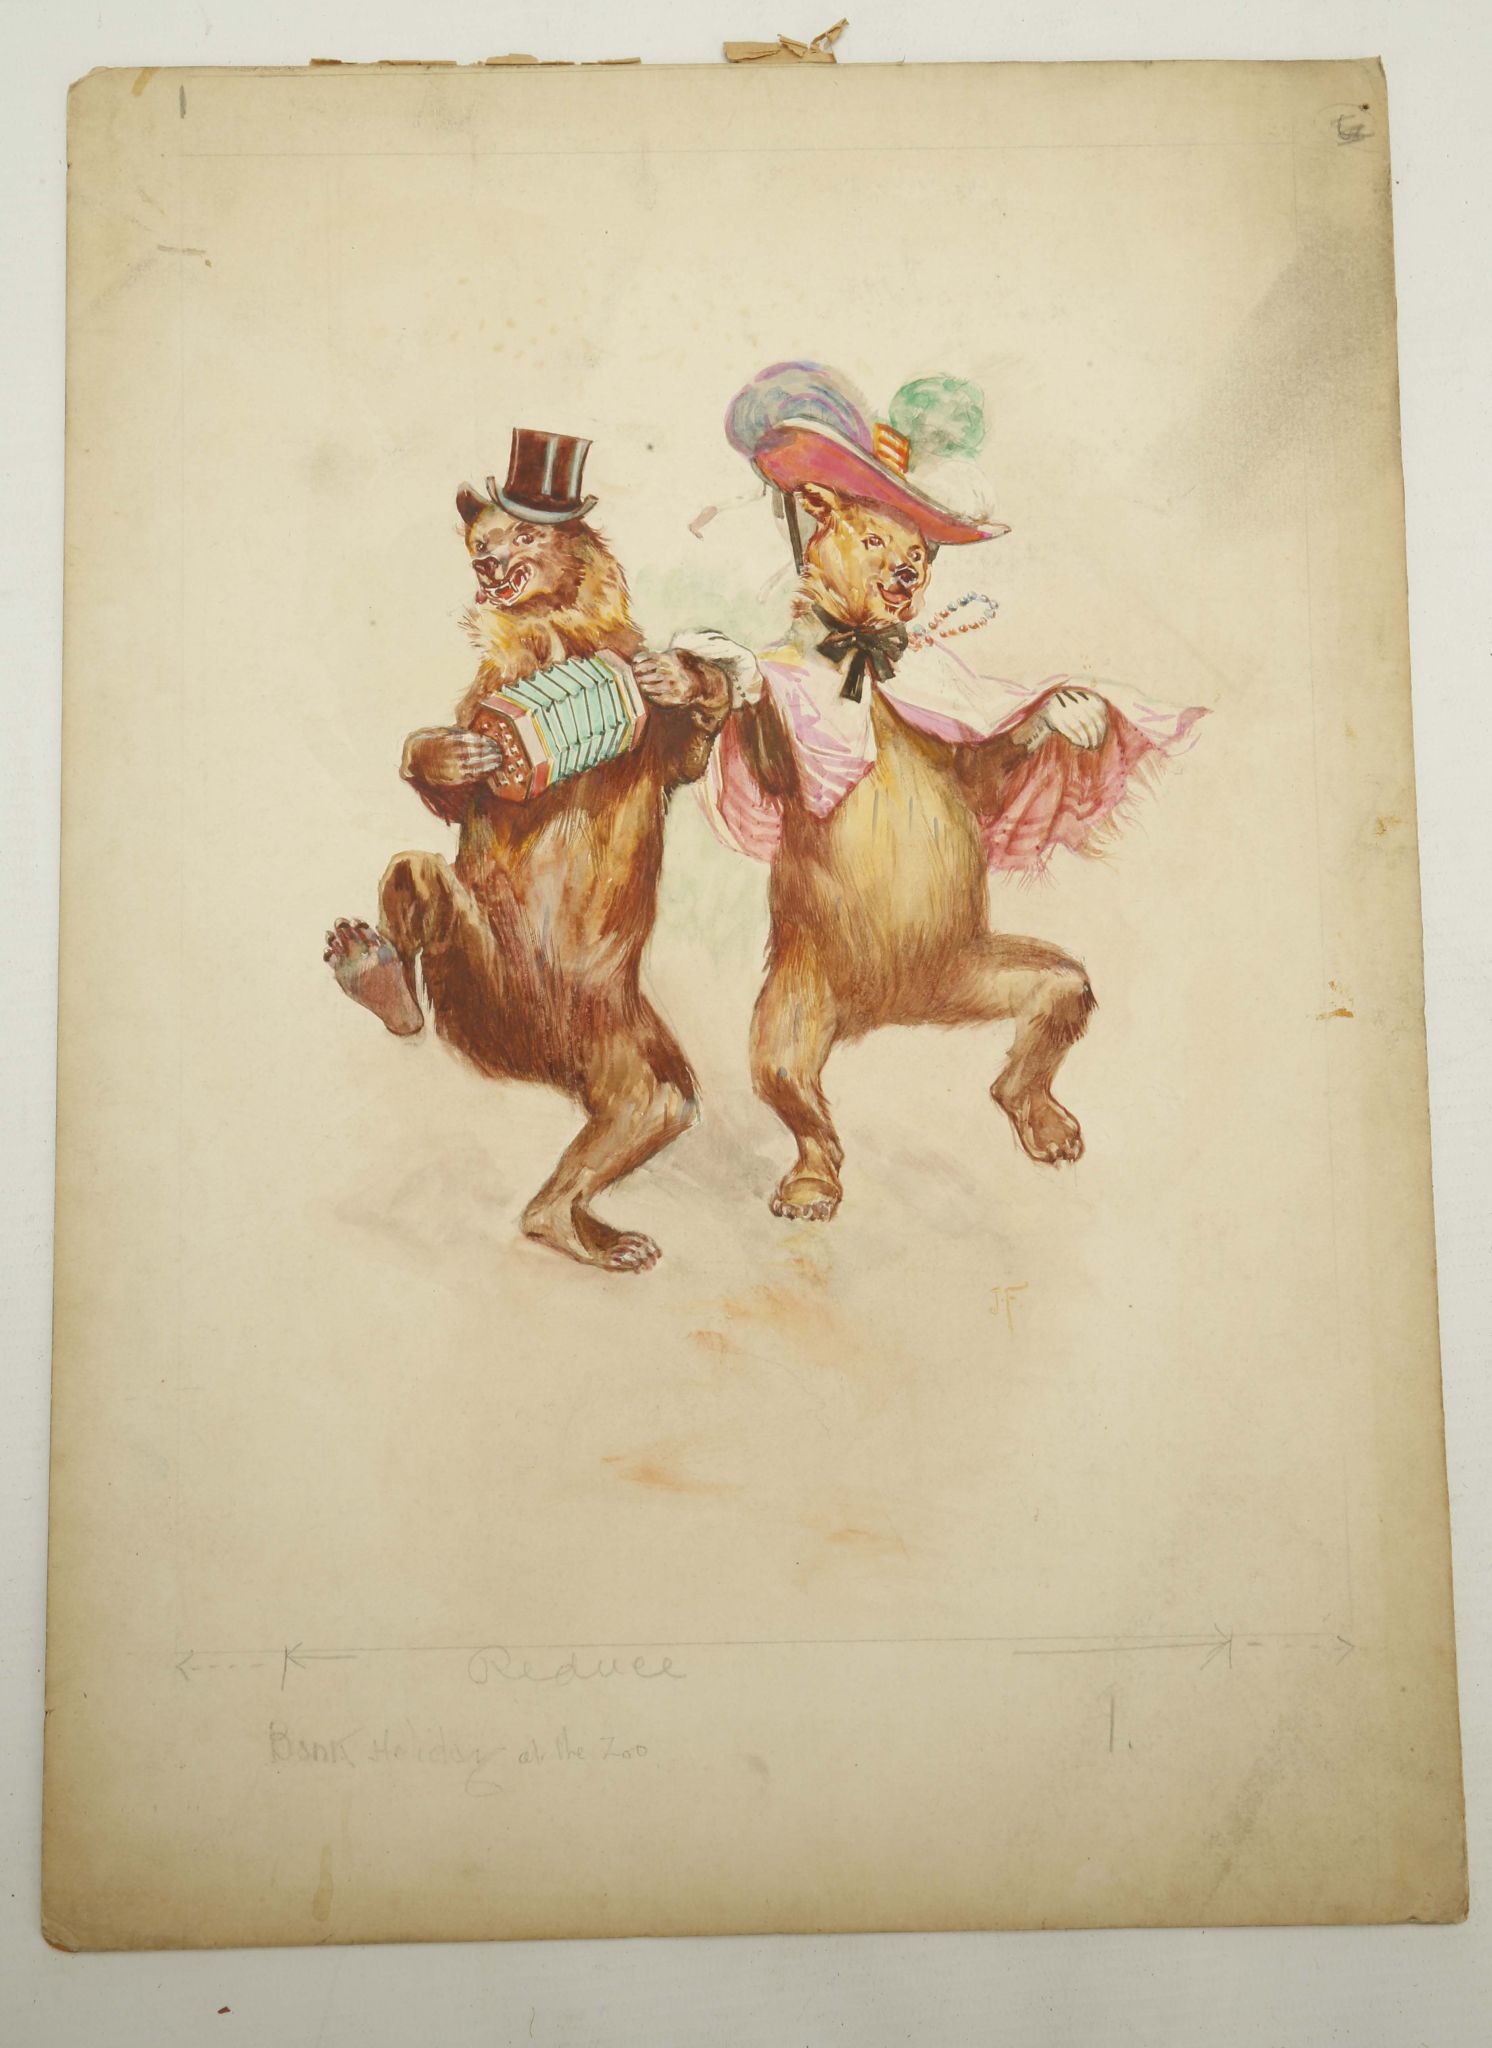 VICTORIAN CIRCUS ILLUSTRATIONS. Six original hand-coloured printed illustrations depicting various - Image 3 of 9